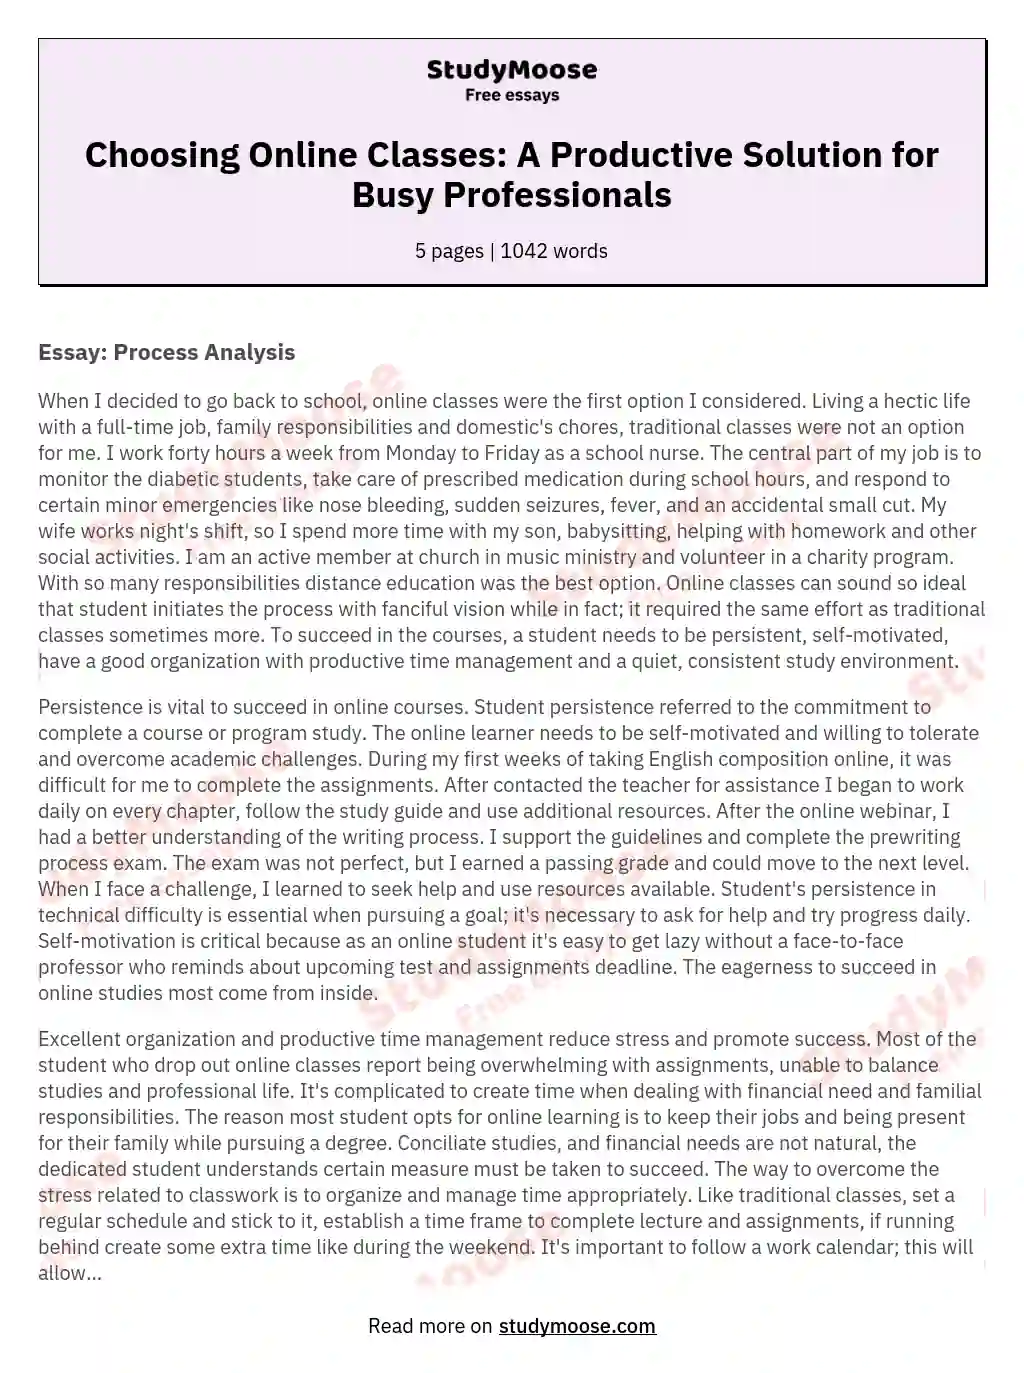 Choosing Online Classes: A Productive Solution for Busy Professionals essay